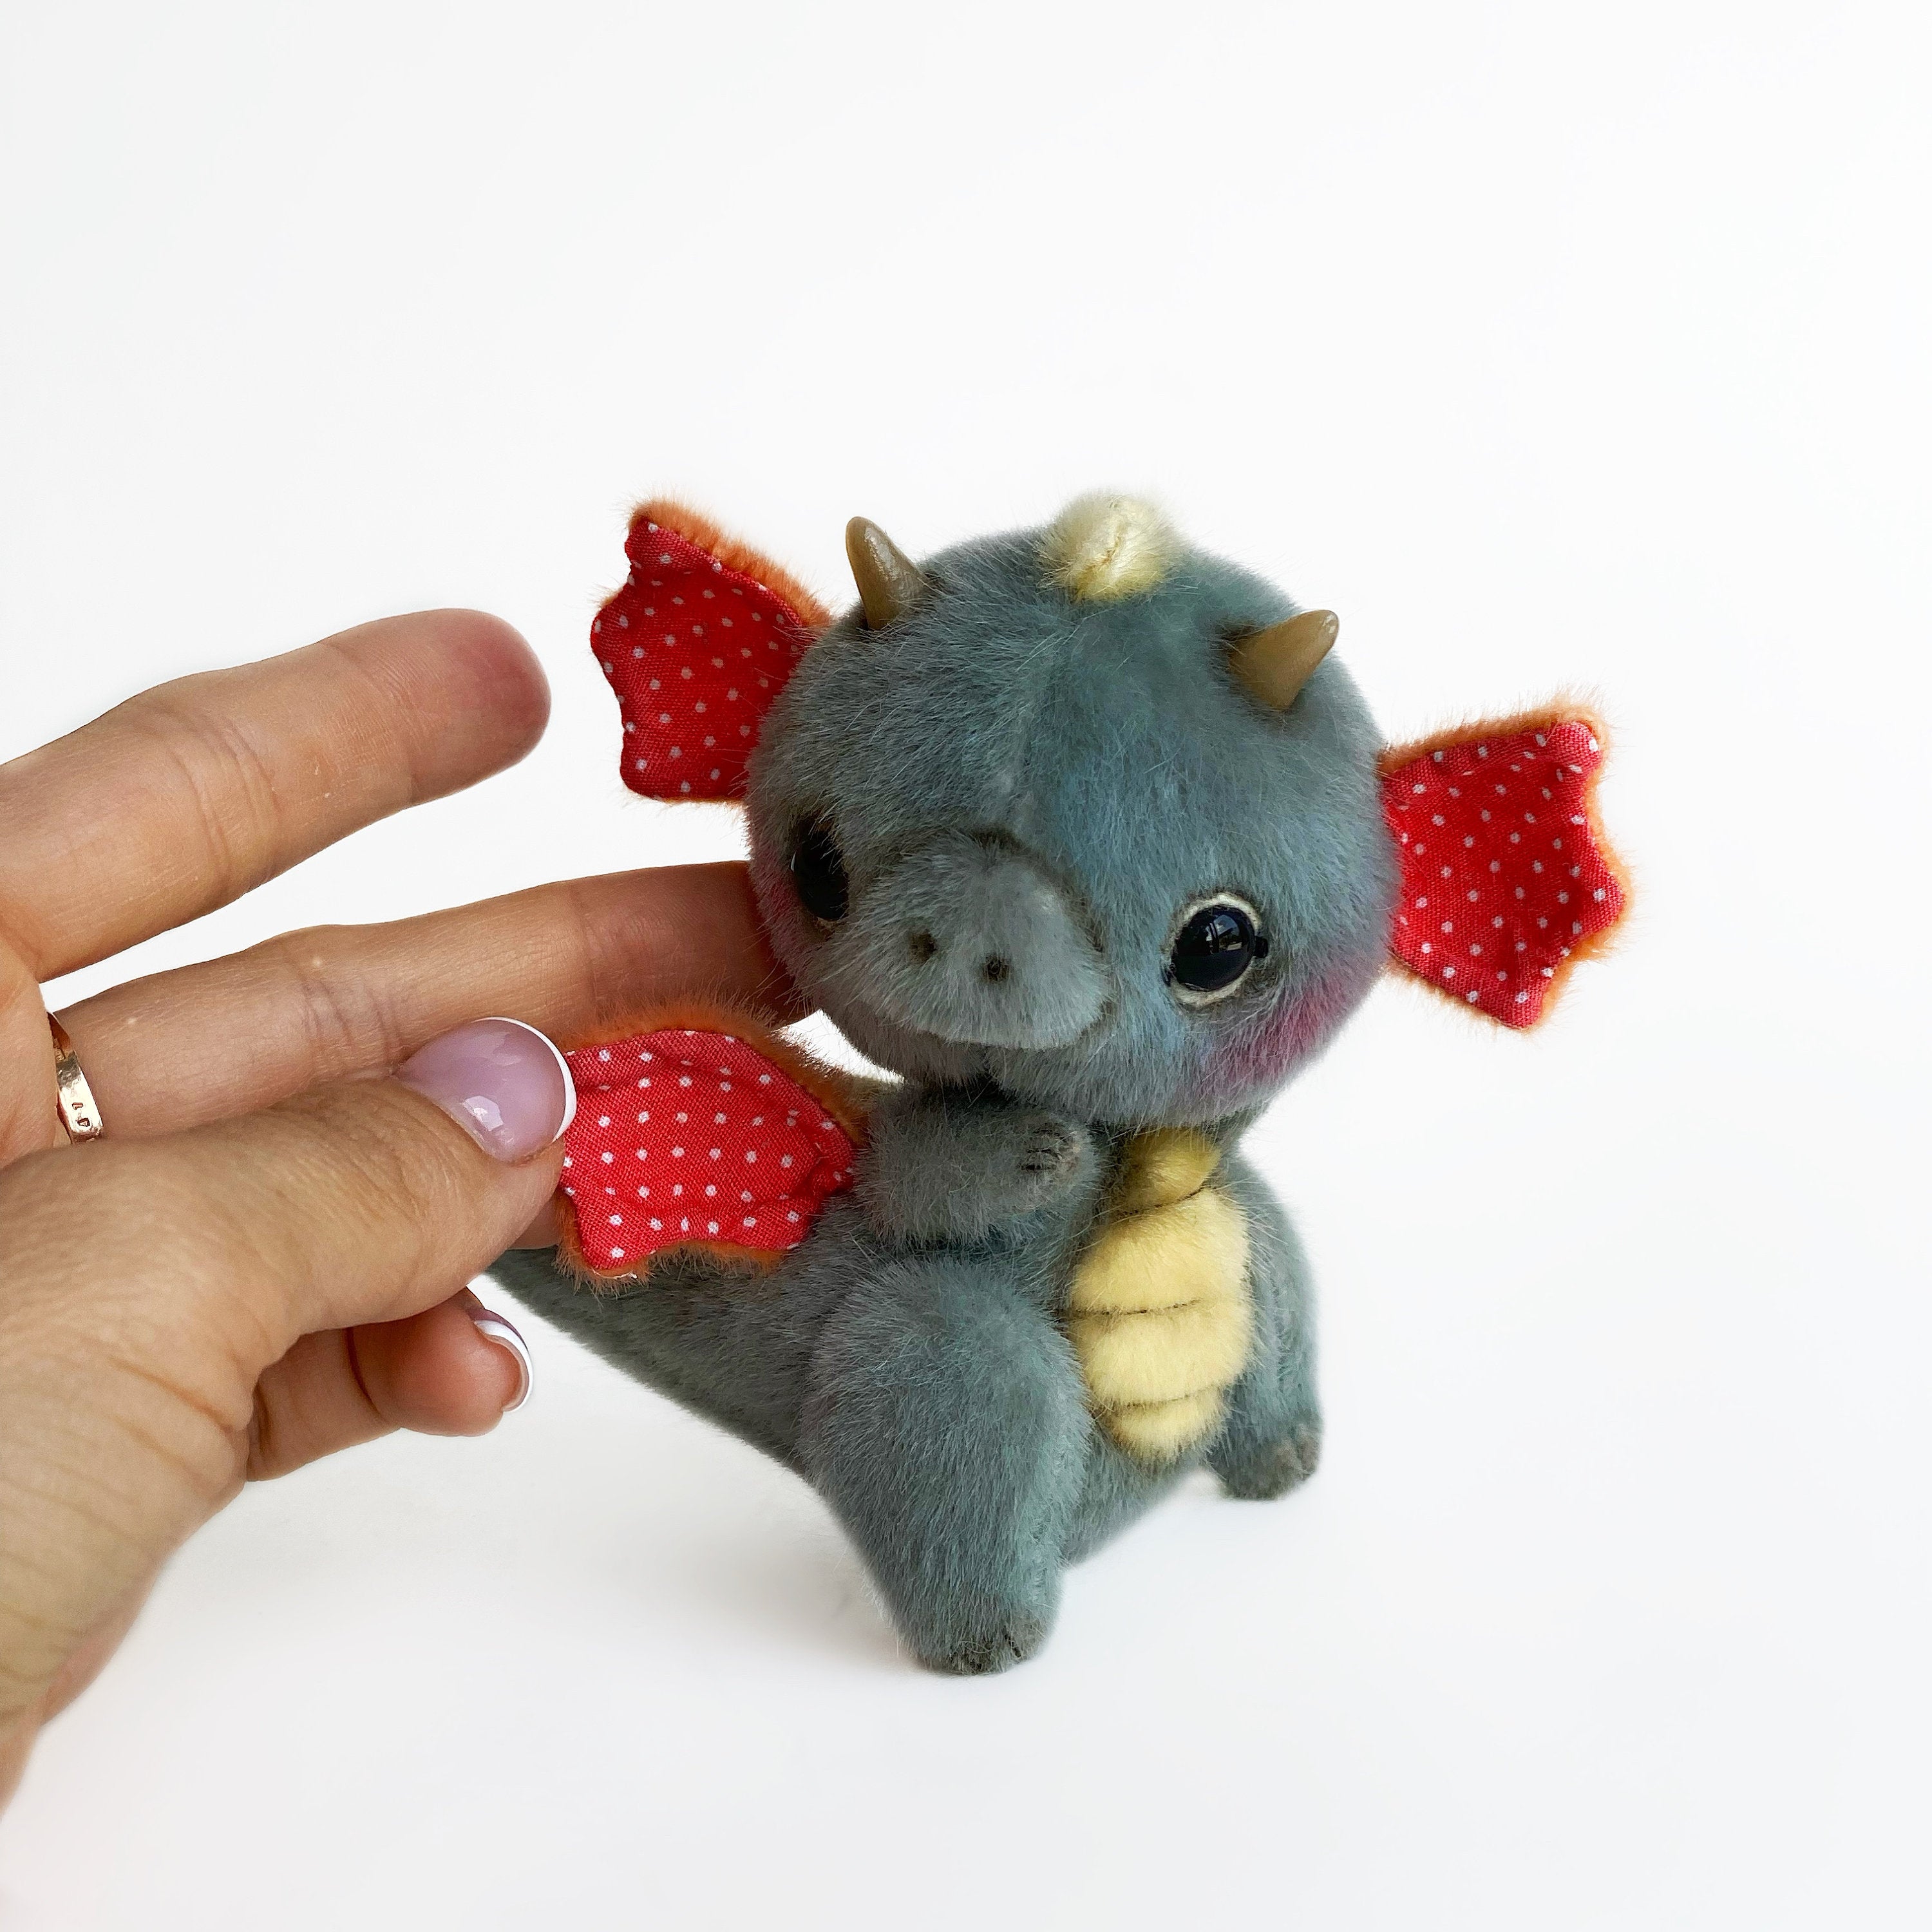 Dragon PDF sewing pattern Video tutorial DIY stuffed toy pattern kids Bestseller easy to sew gift for creative friend